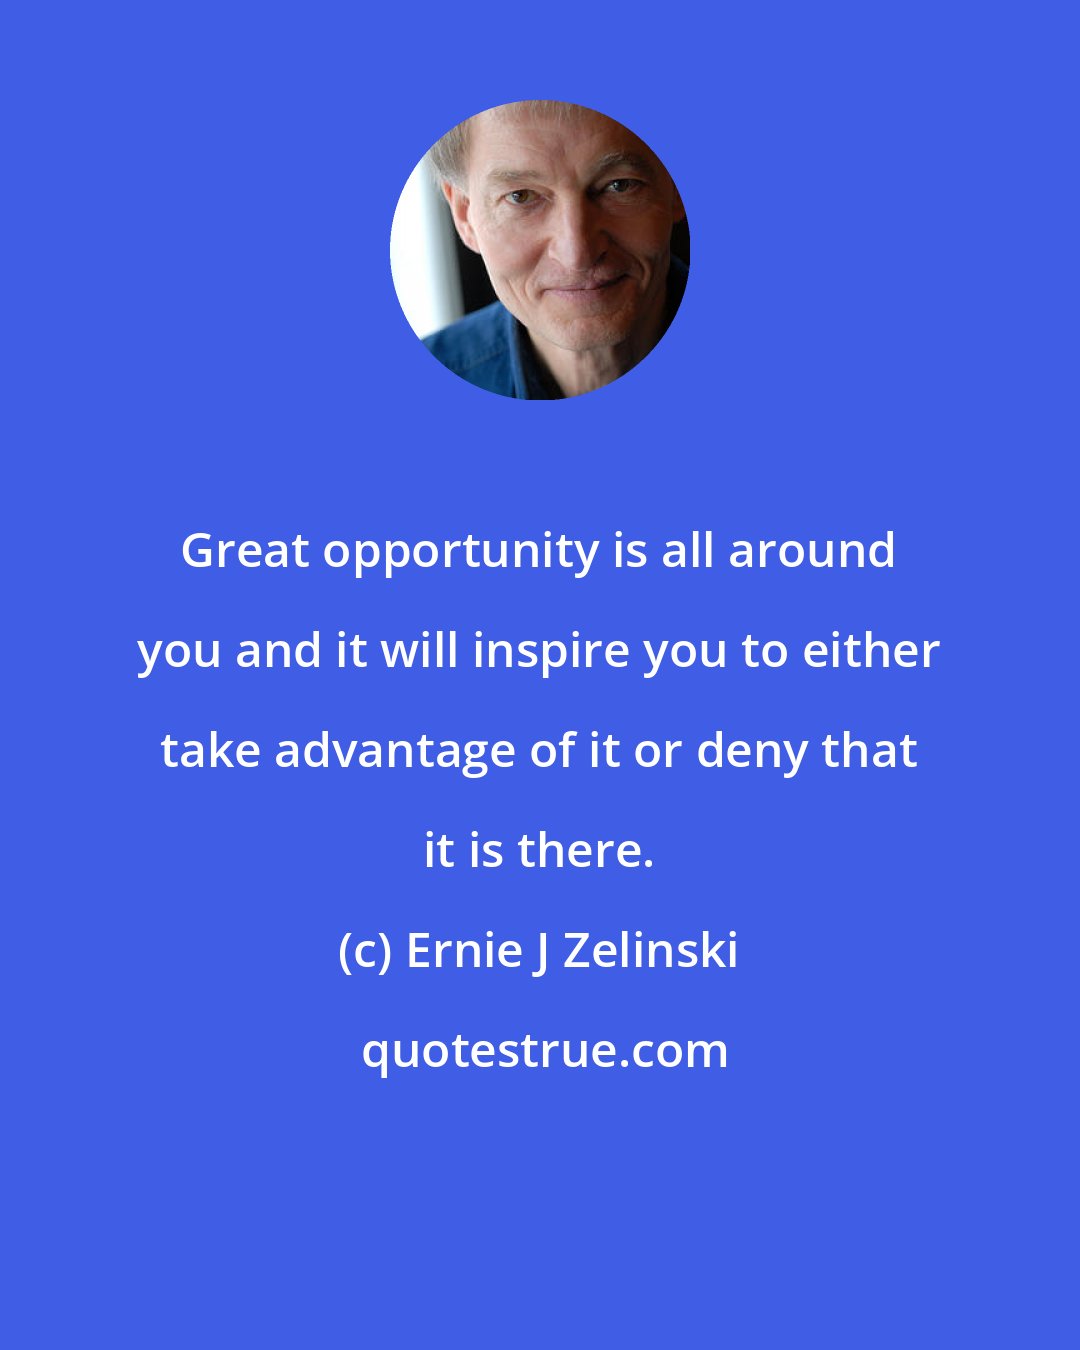 Ernie J Zelinski: Great opportunity is all around you and it will inspire you to either take advantage of it or deny that it is there.